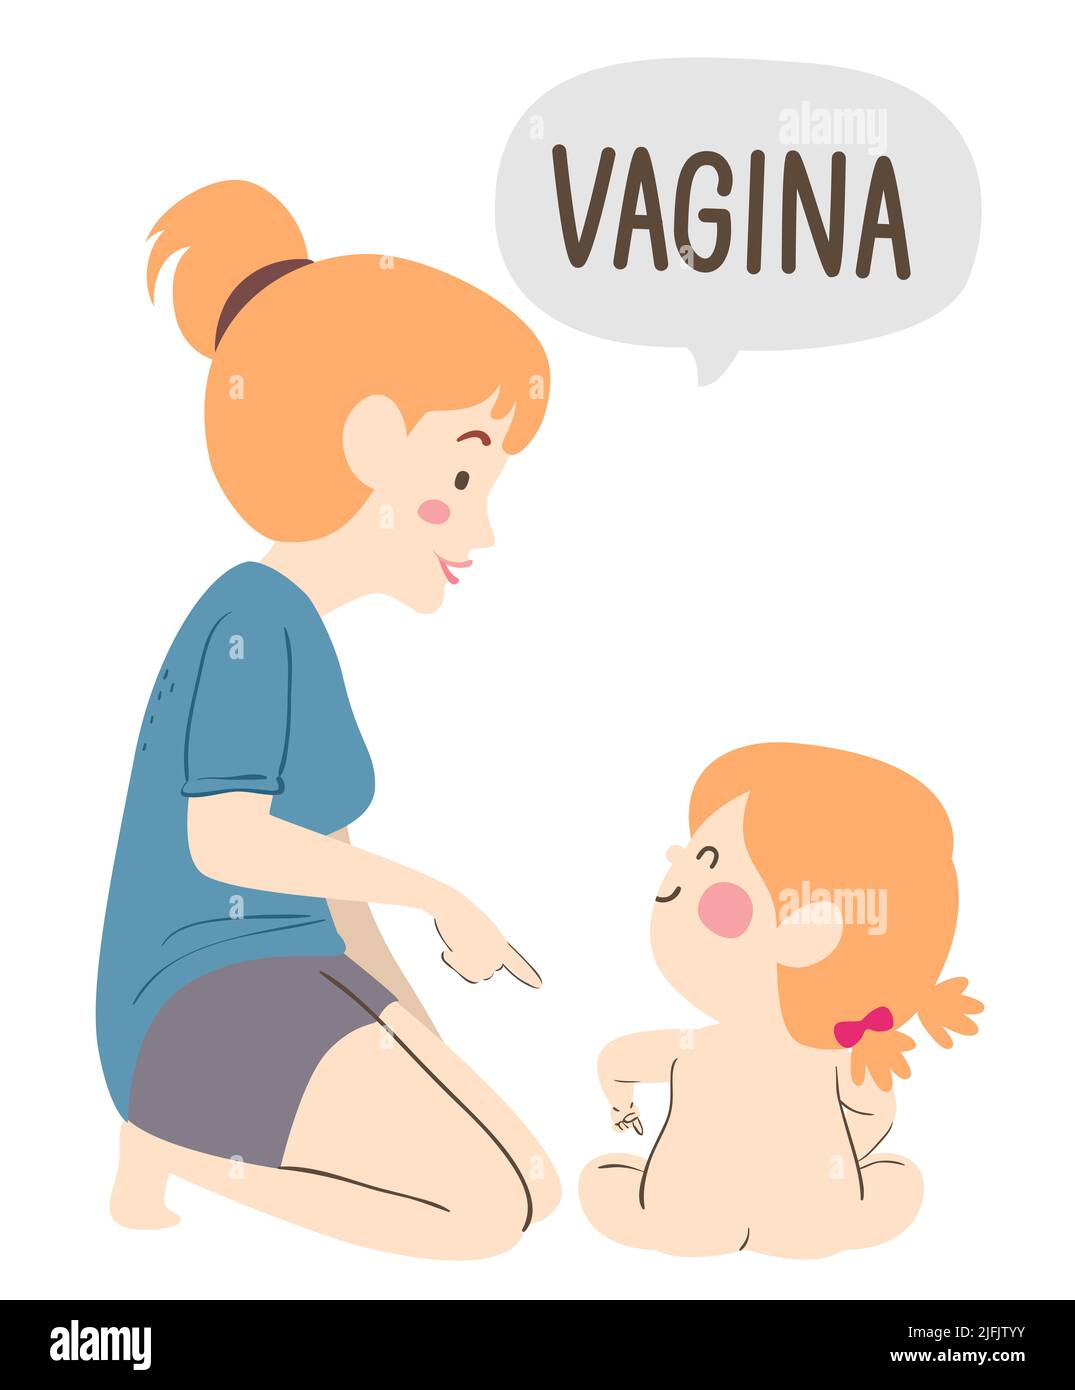 Illustration of Kid Girl Sitting Pointing Her Private Body Part, Mom Pointing and Saying Vagina Stock Photo